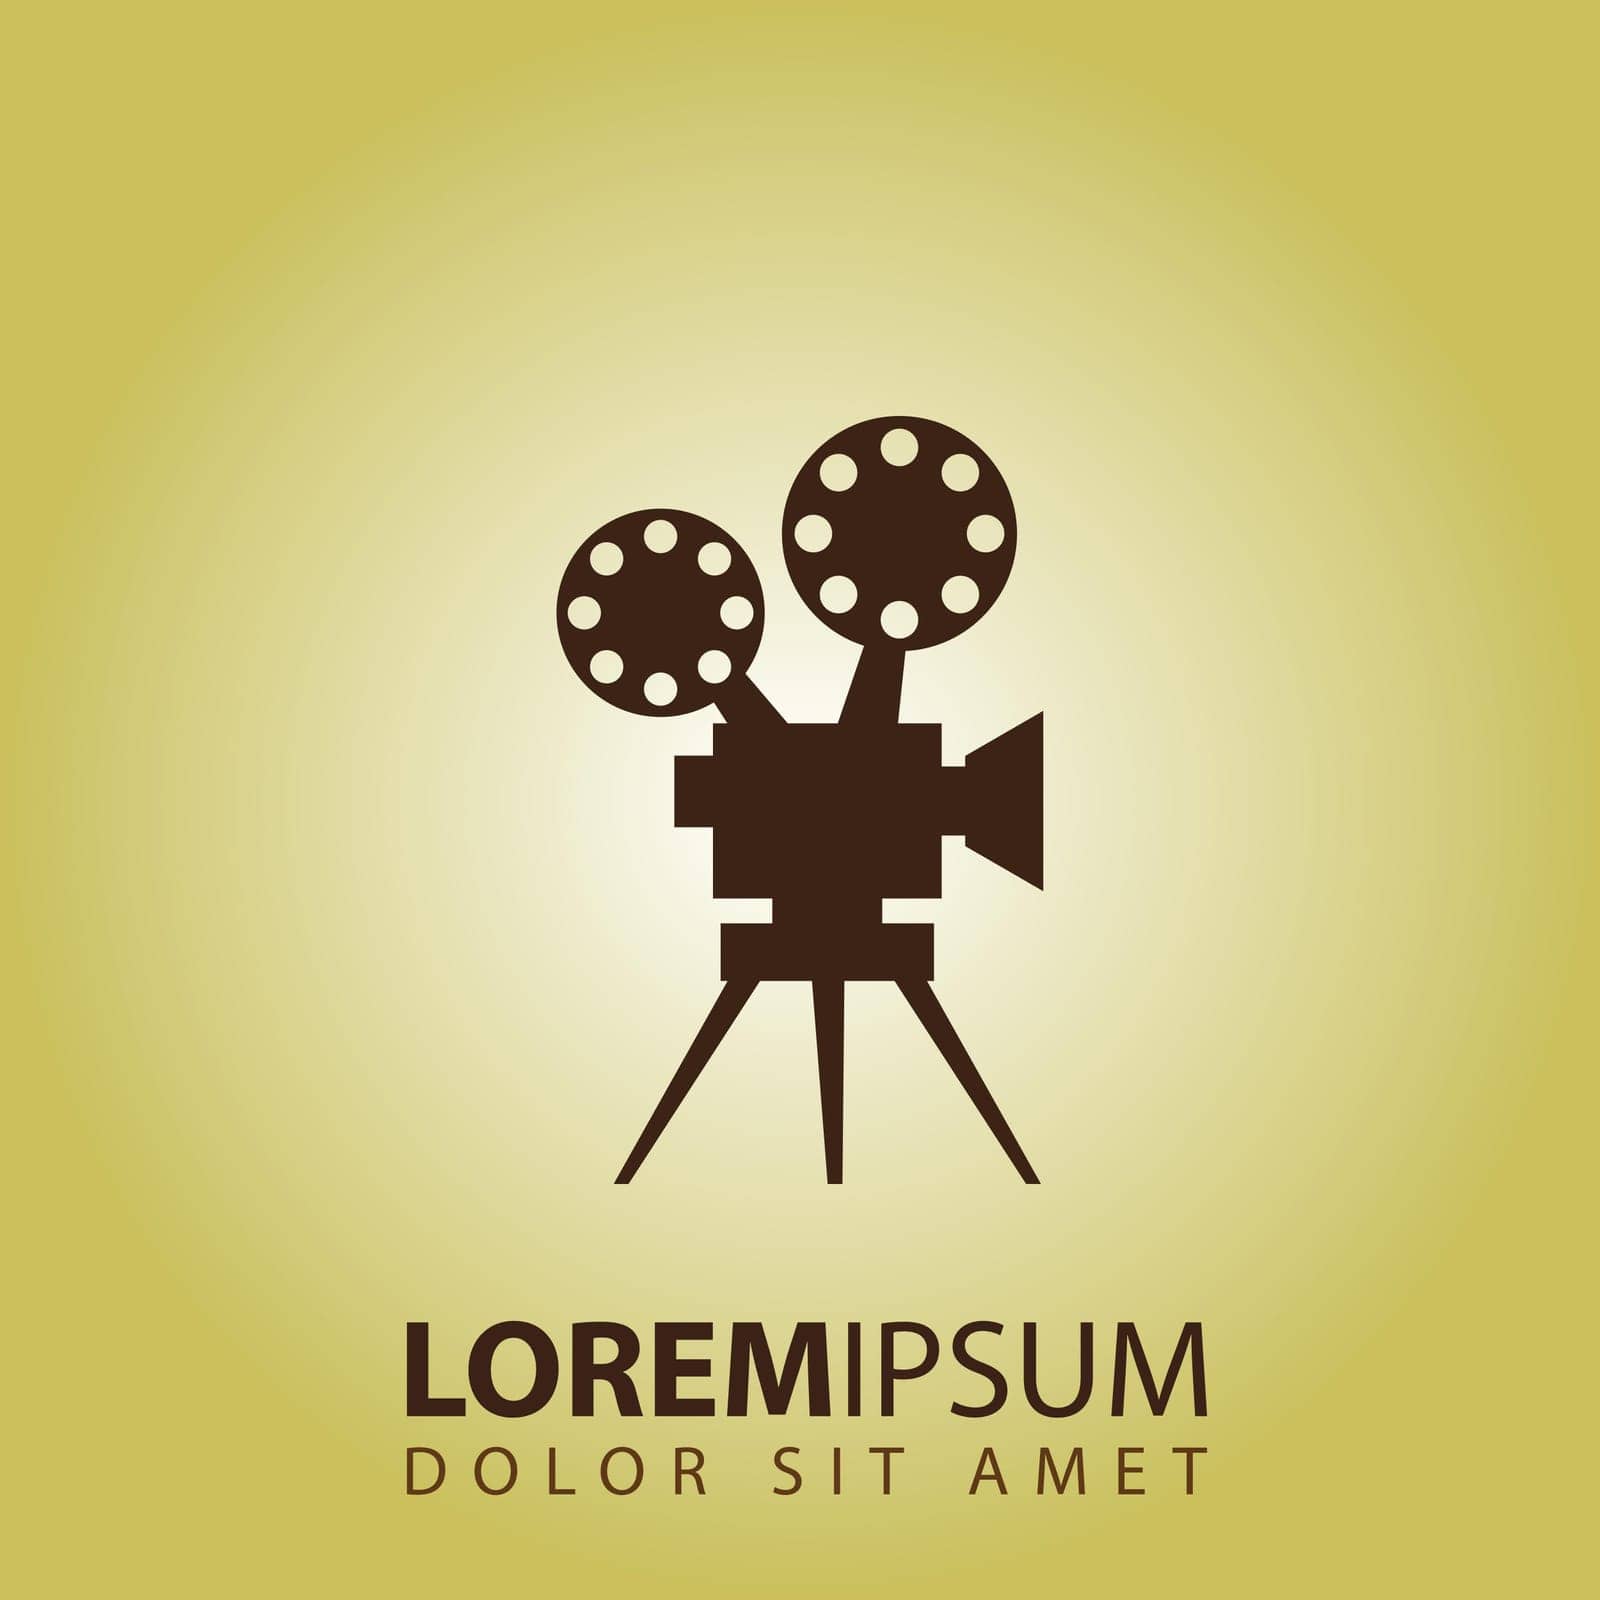 broadcast,symbol,tv,movie,production,icon,isolated,recording,simple,industry,video,media,camcorder,button,signs,white,modern,web,projector,design,vector,cinema,camera,communication,filmstrip,old,television,black,retro,photo,film,technology,picture,reel,single,square,multimedia,round,elements,illustration,internet